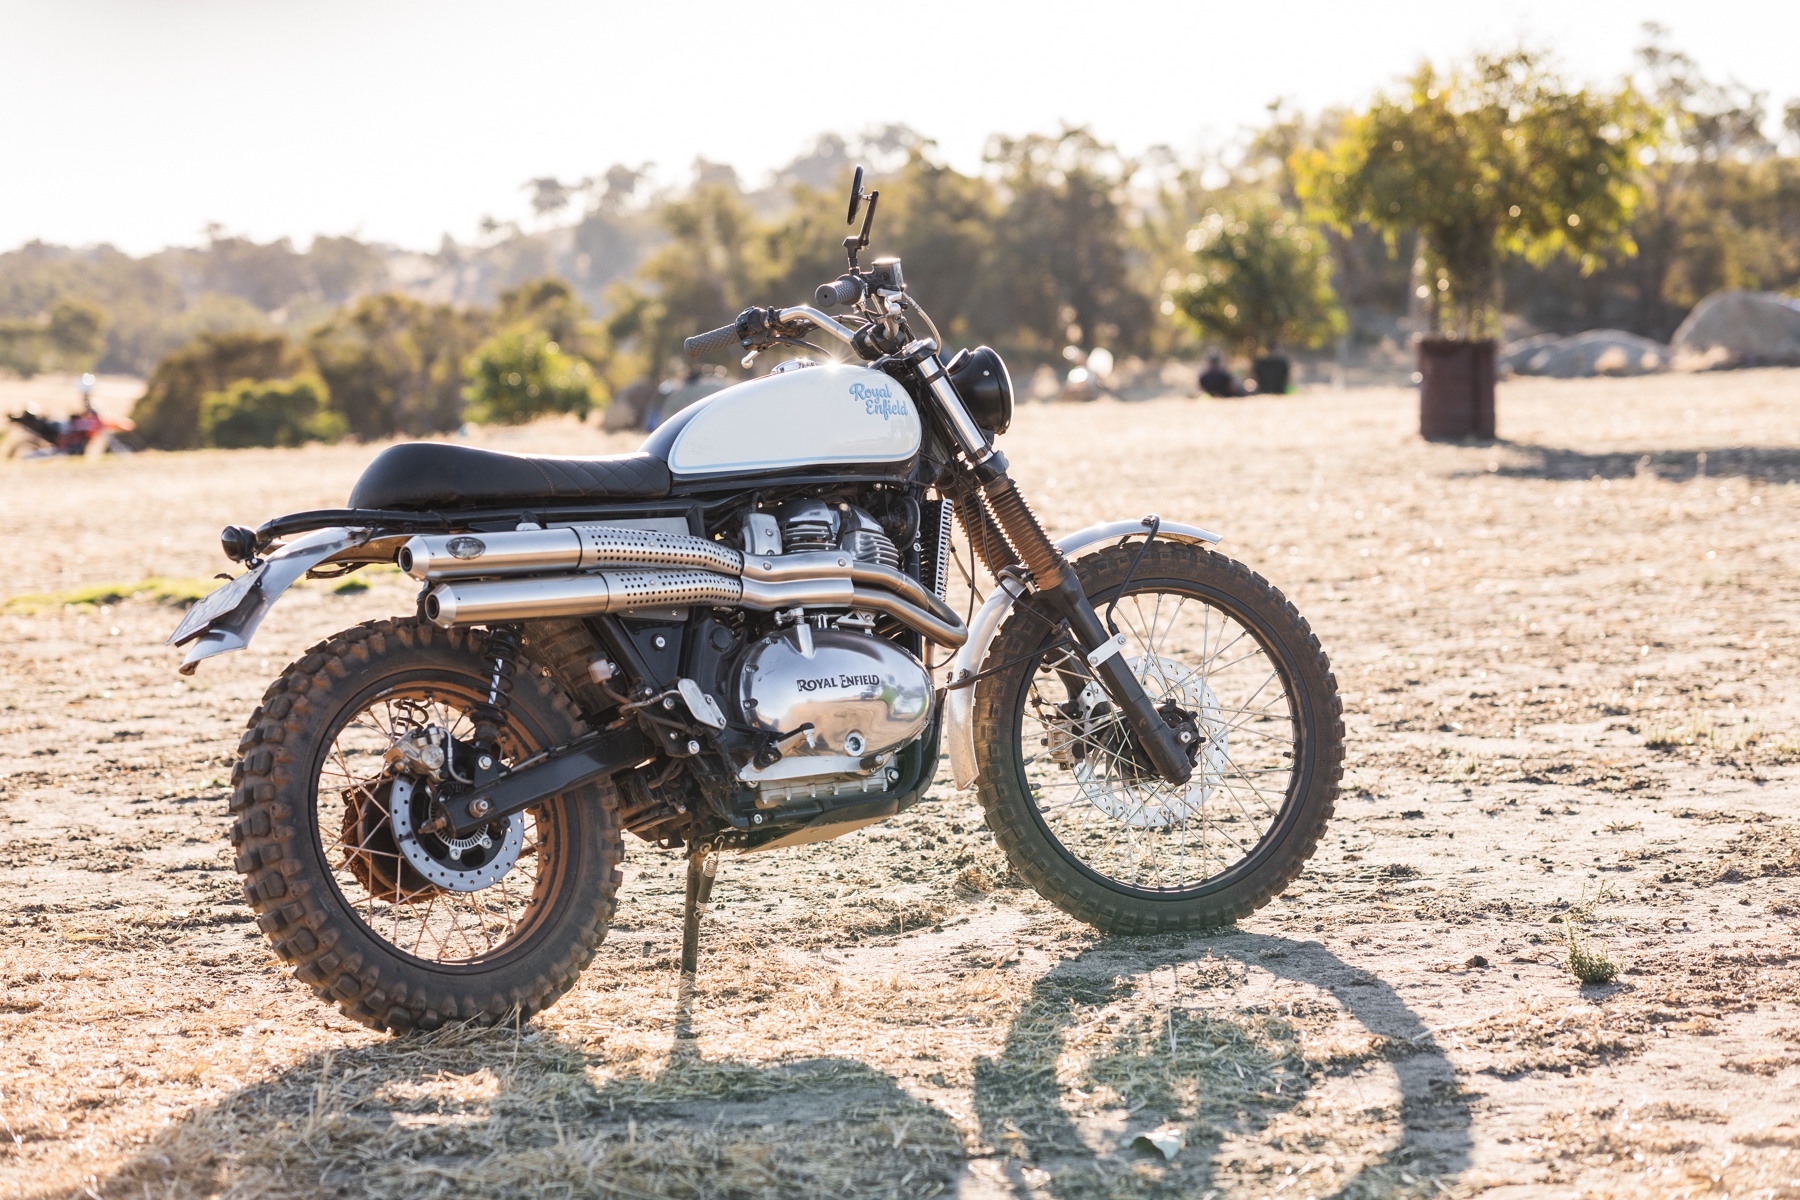 Side photo of a Royal Enfield scrambler motorcycle in a paddock